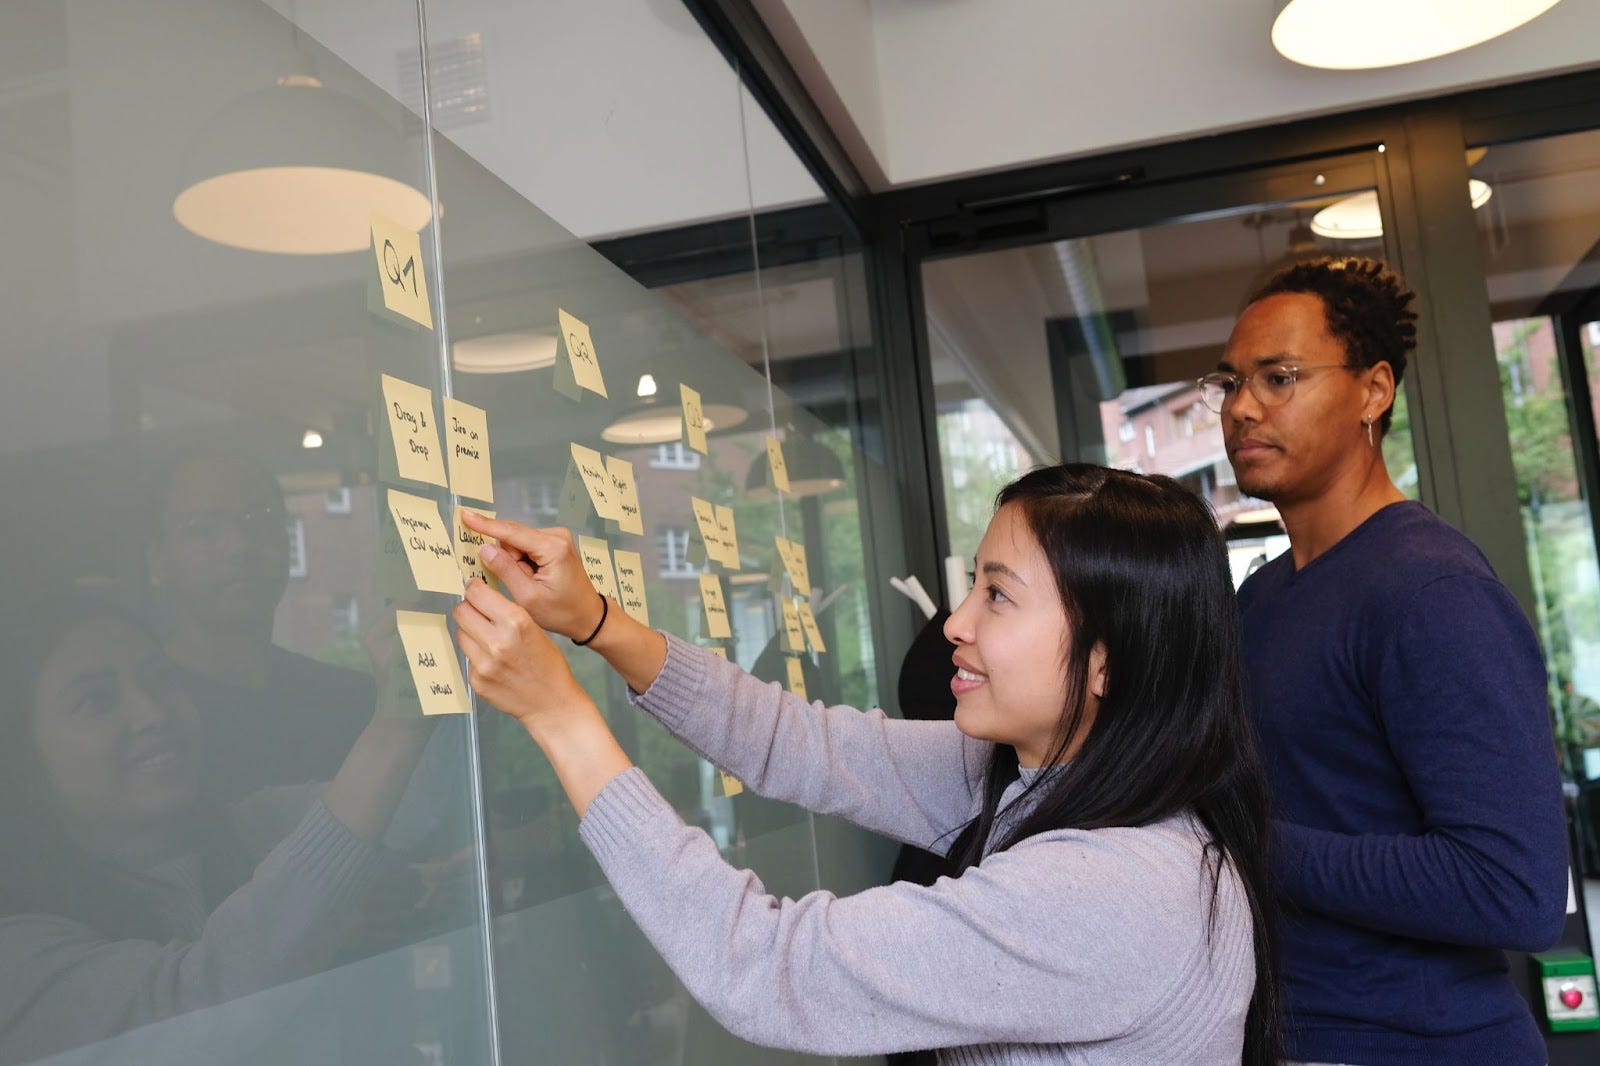 employees pasting post-it notes on a board